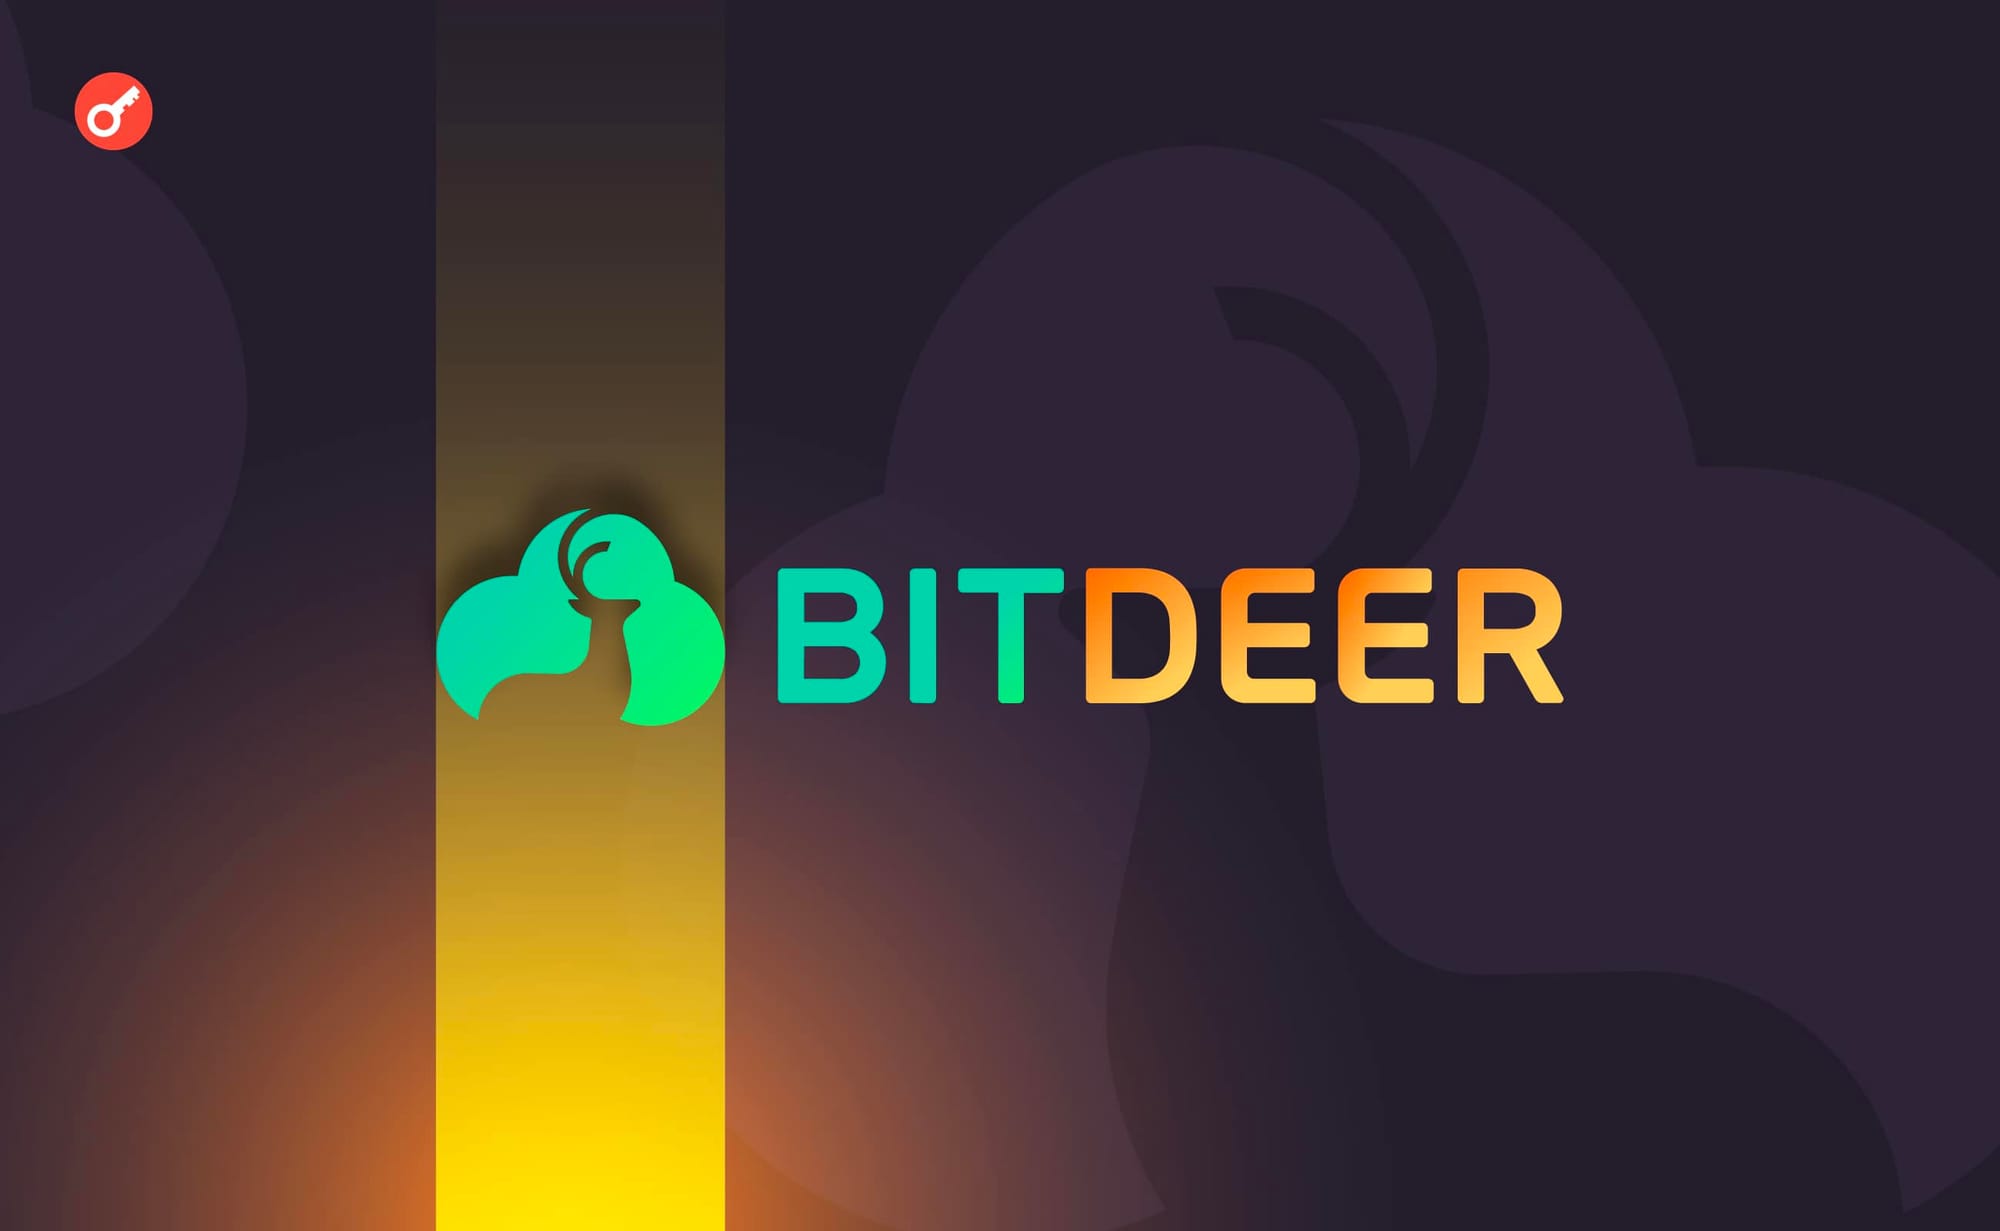 Benchmark called the shares of bitcoin miner Bitdeer undervalued